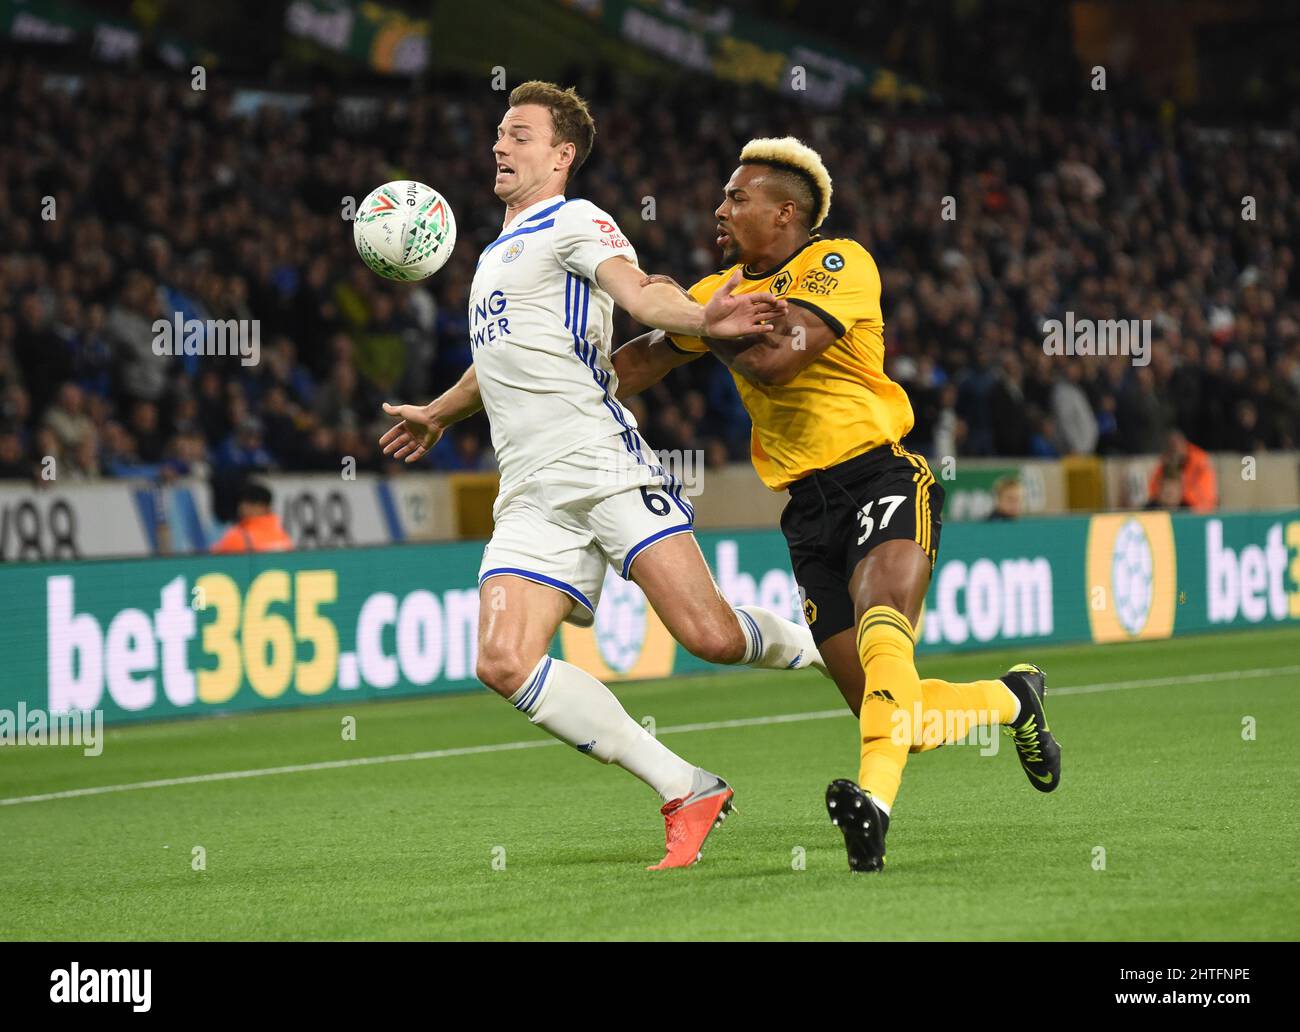 Adama Traore of Wolverhampton Wanderers and Jonny Evans of Leicester City. Wolverhampton Wanderers v Leicester City at Molineux 25/09/2018 - Carabao Cup Stock Photo